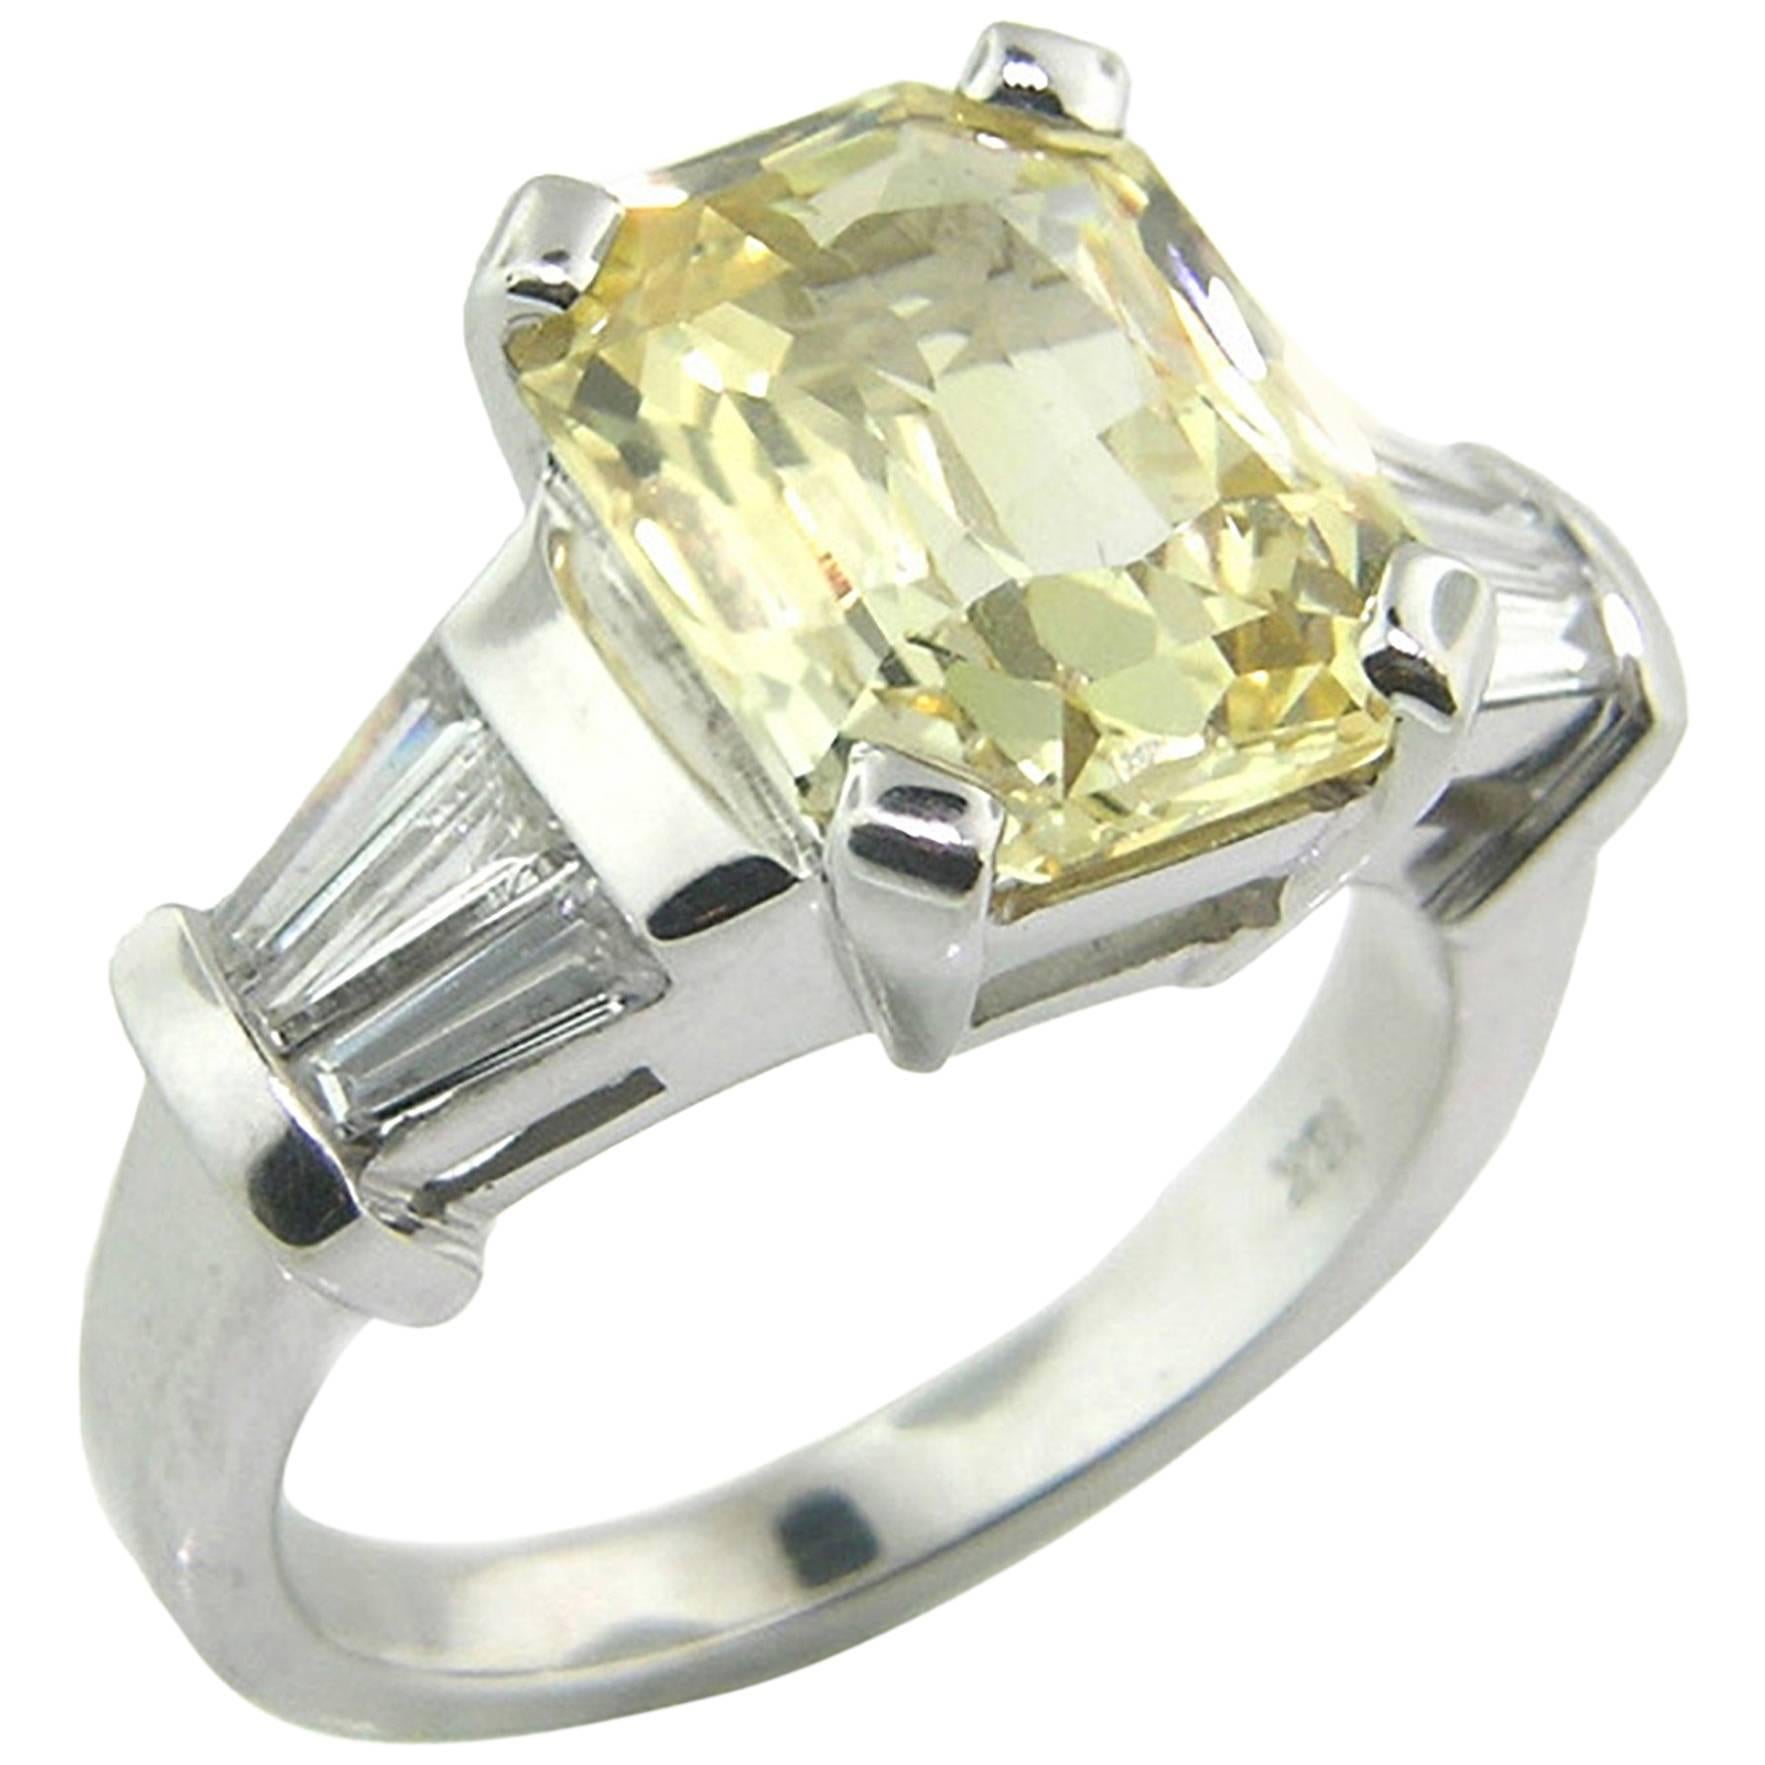 This natural color 5.44ct yellow sapphire from Sri Lanka (Ceylon) is precision faceted in a gorgeous radiant emerald cut.  This stone sparkles like crazy, and the luxurious size and soft canary color will command attention. 

The diamonds have a